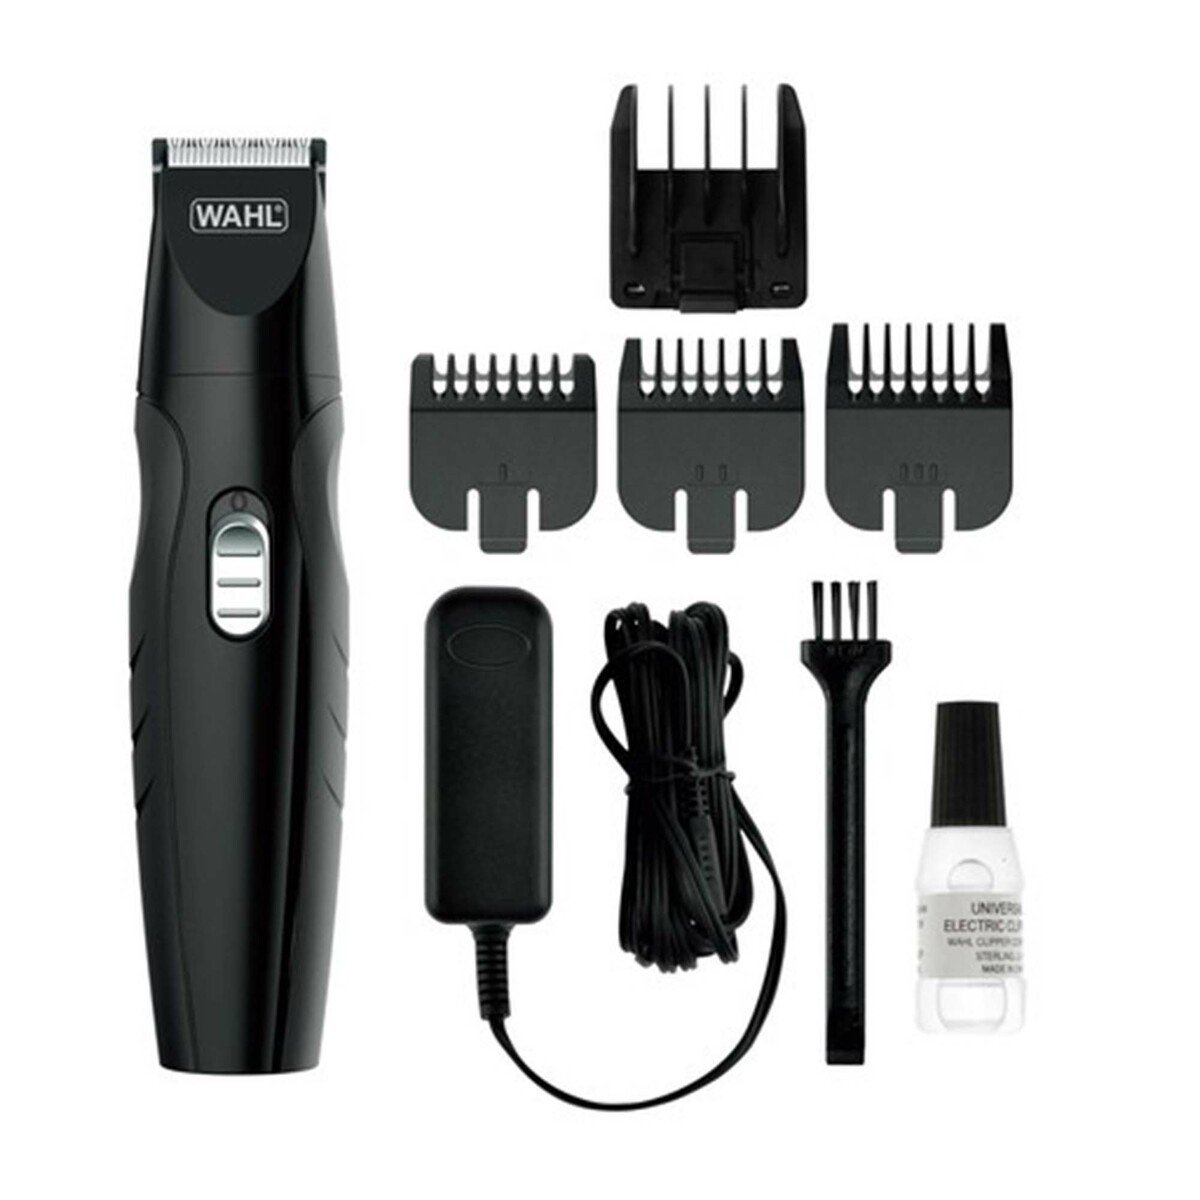 Wahl Rechargeable Trimmer 9685-027